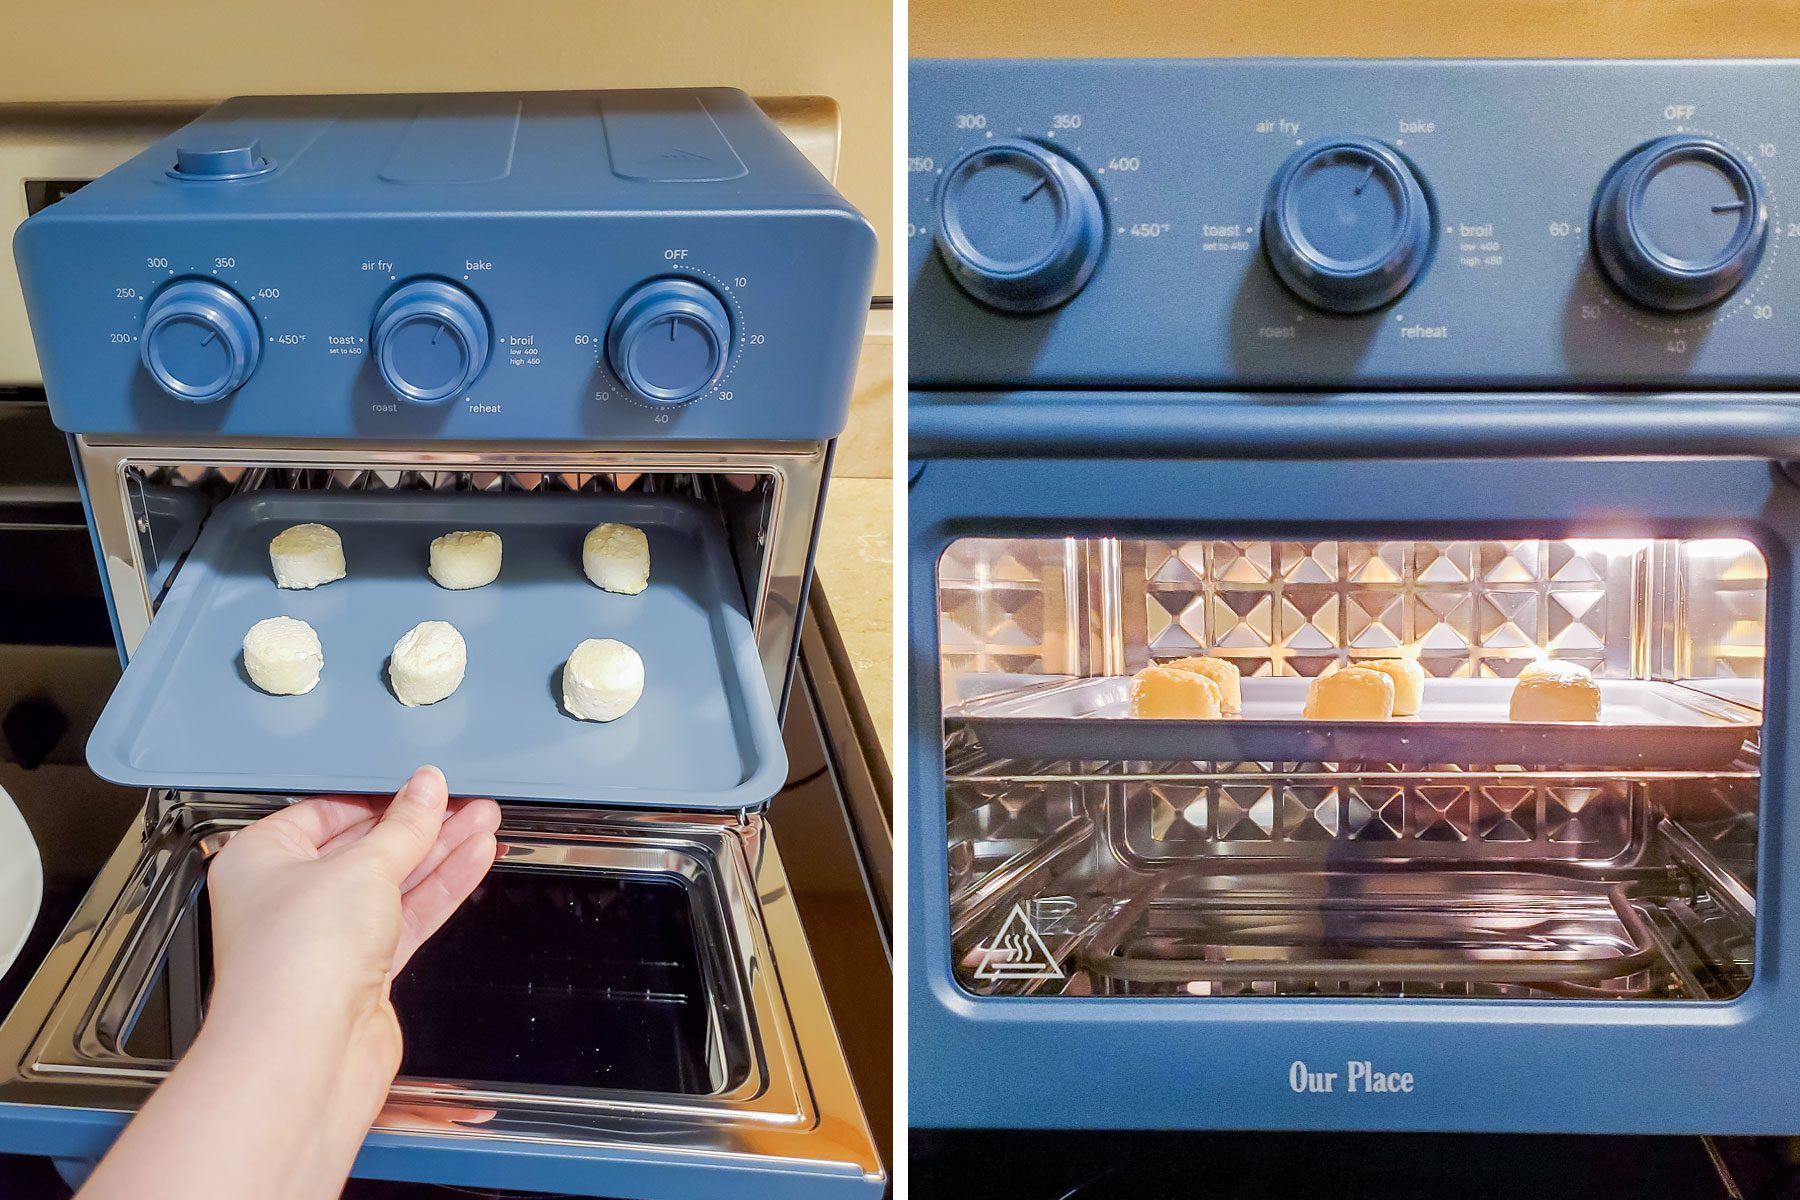 Our Place Wonder Oven Launches: Here's What We Know